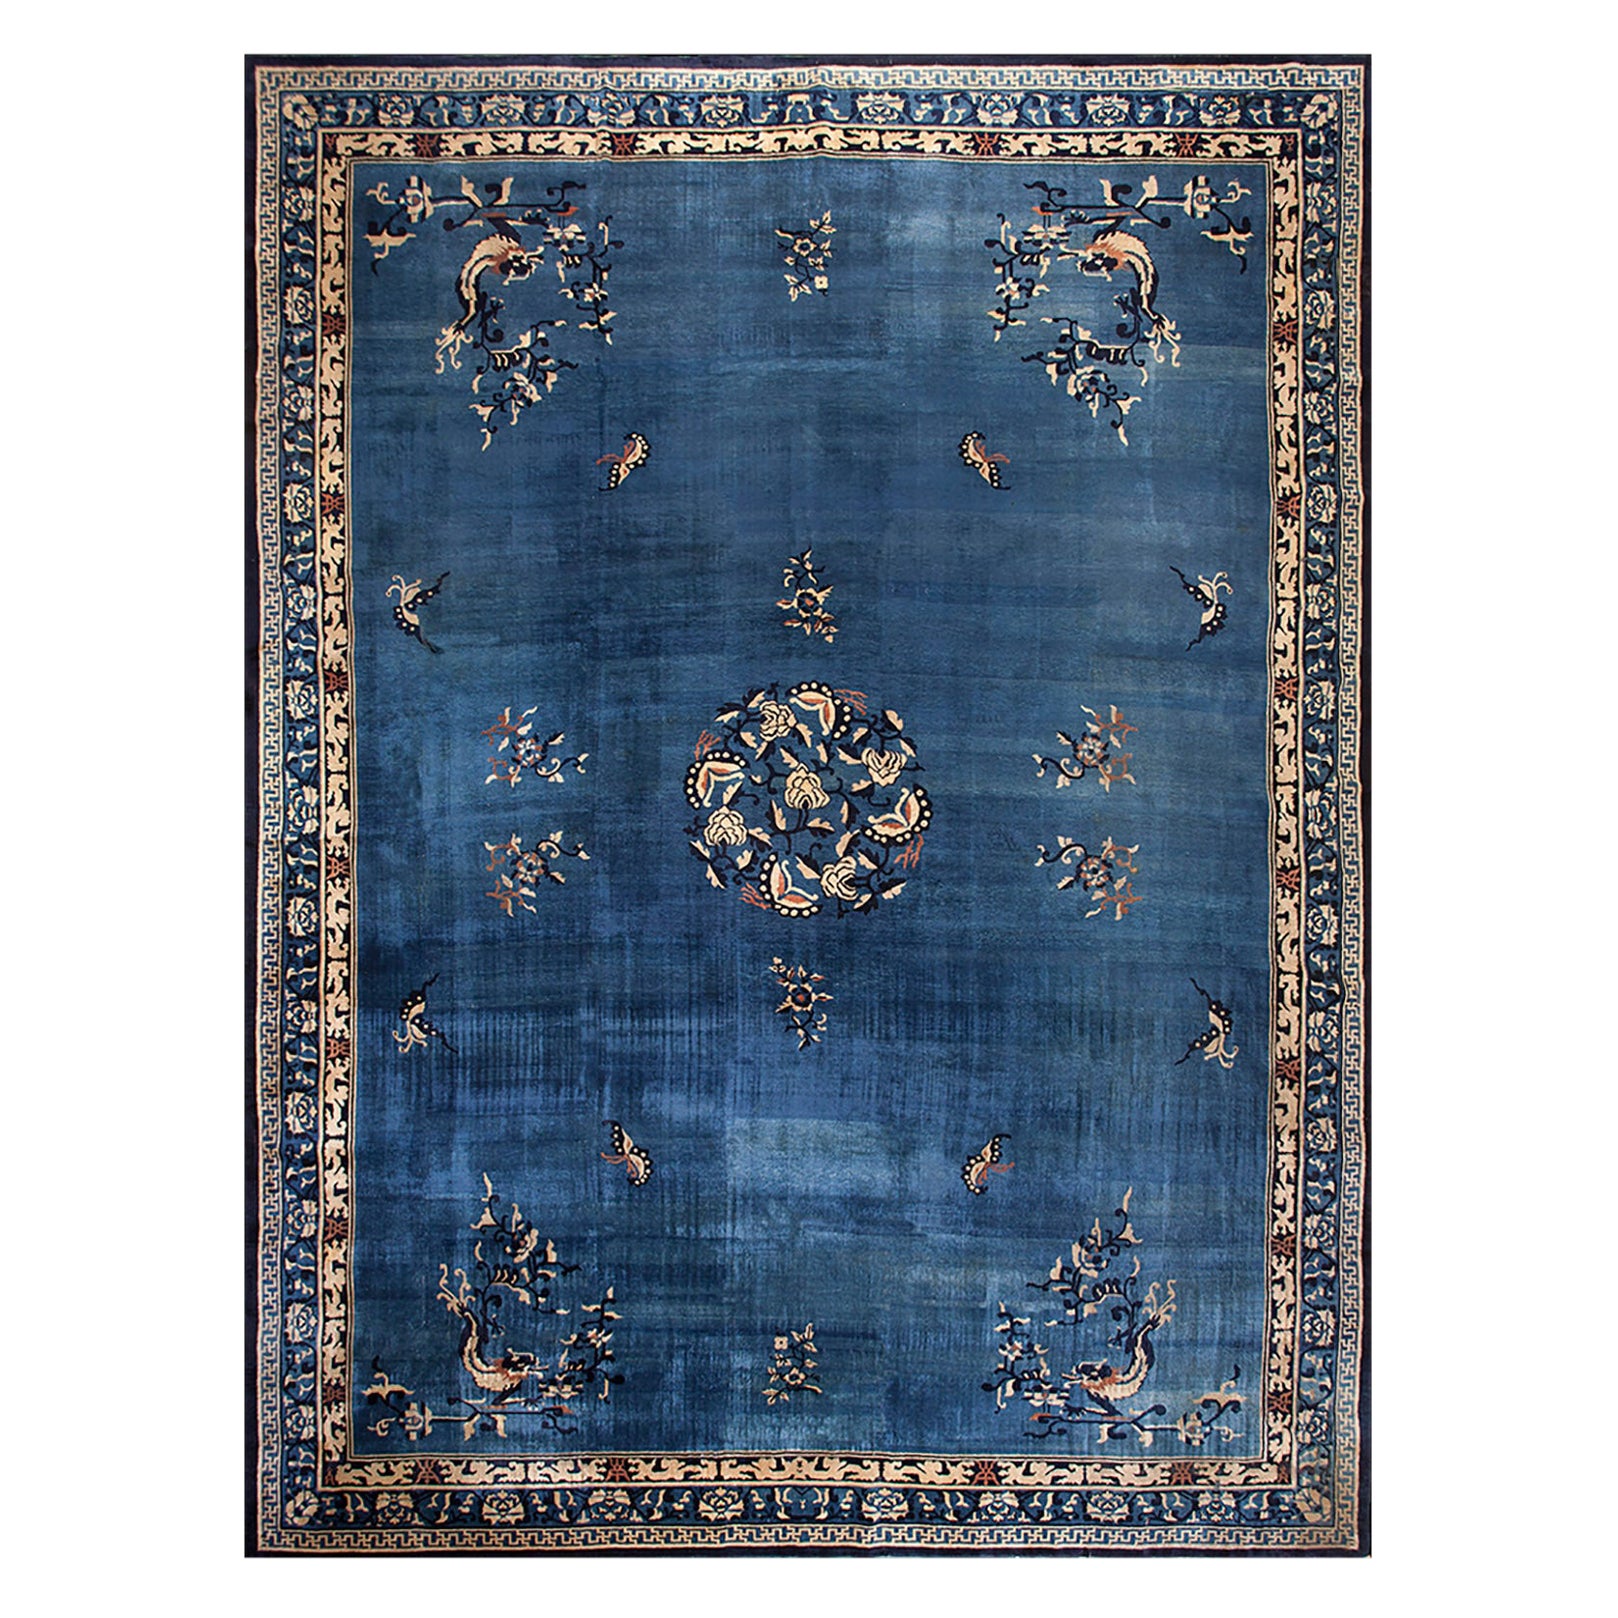 Early 20th Century Chinese Carpet ( 14'6" x 20'2" - 442 x 615 )